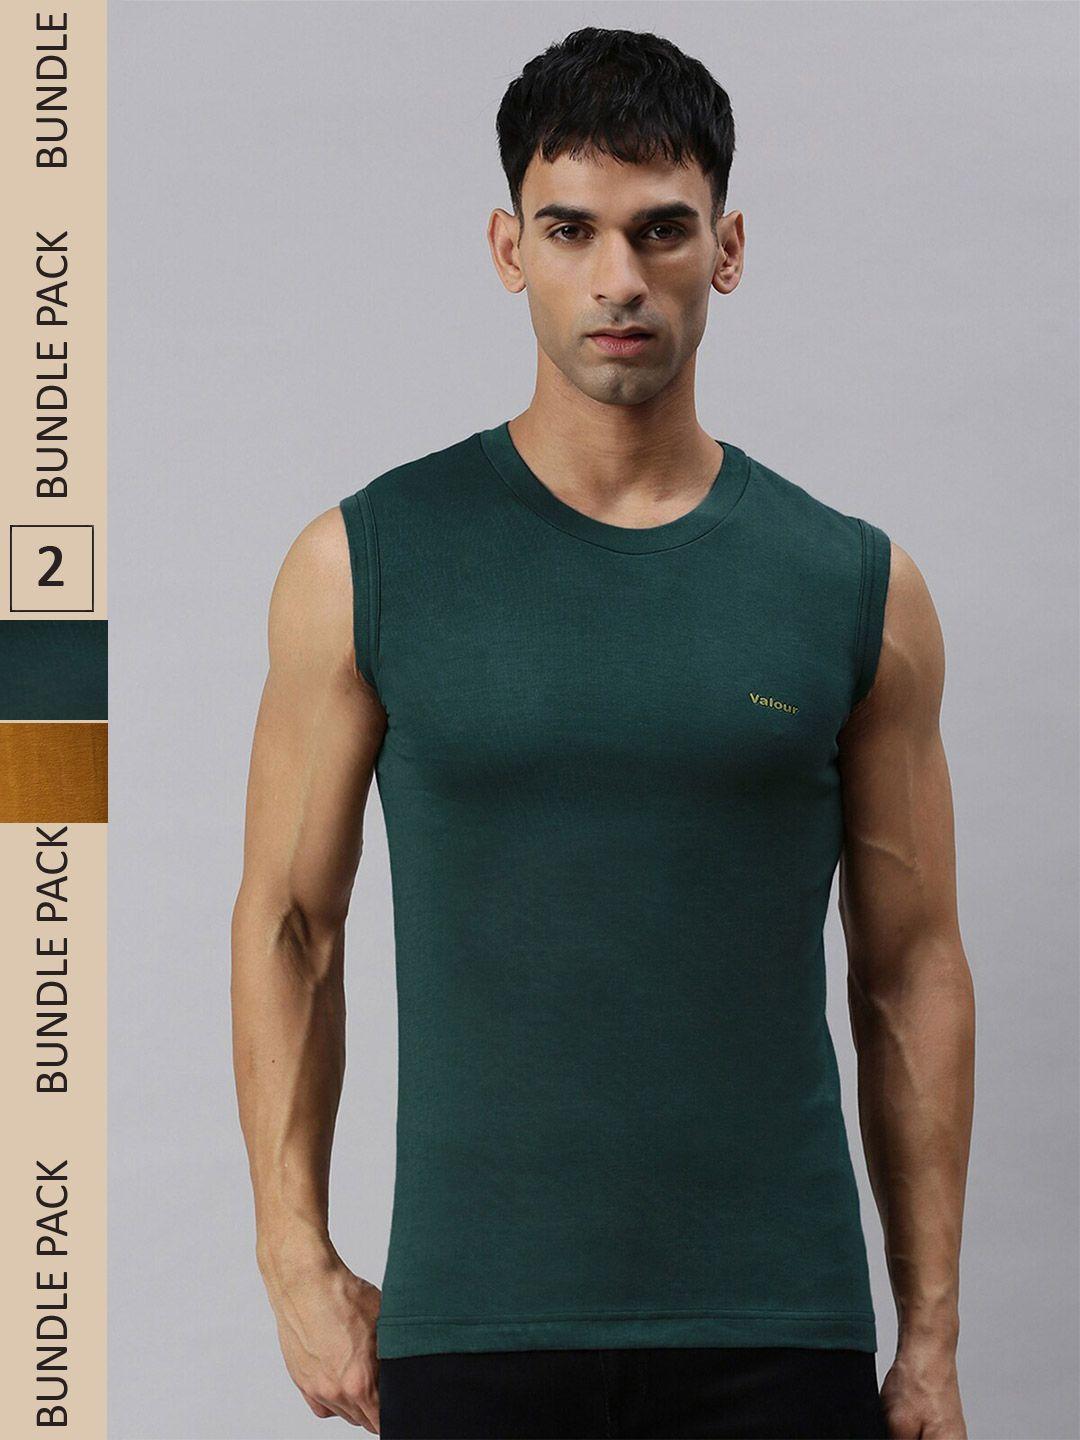 lux-cozi-pack-of-2-round-neck-sleeveless-slim-fit-cotton-t-shirt